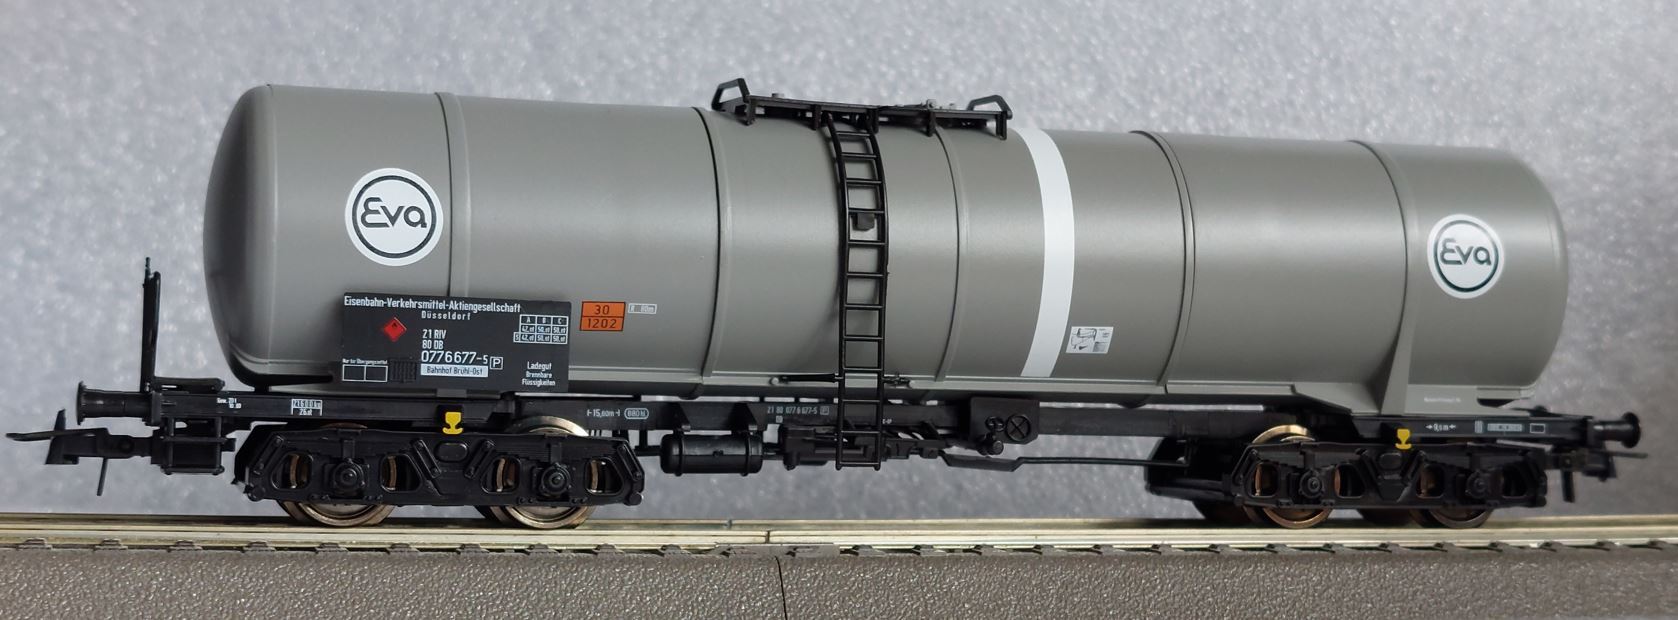 Roco 67850 H0 Tank Car from Private Company Eva, Registered With DB